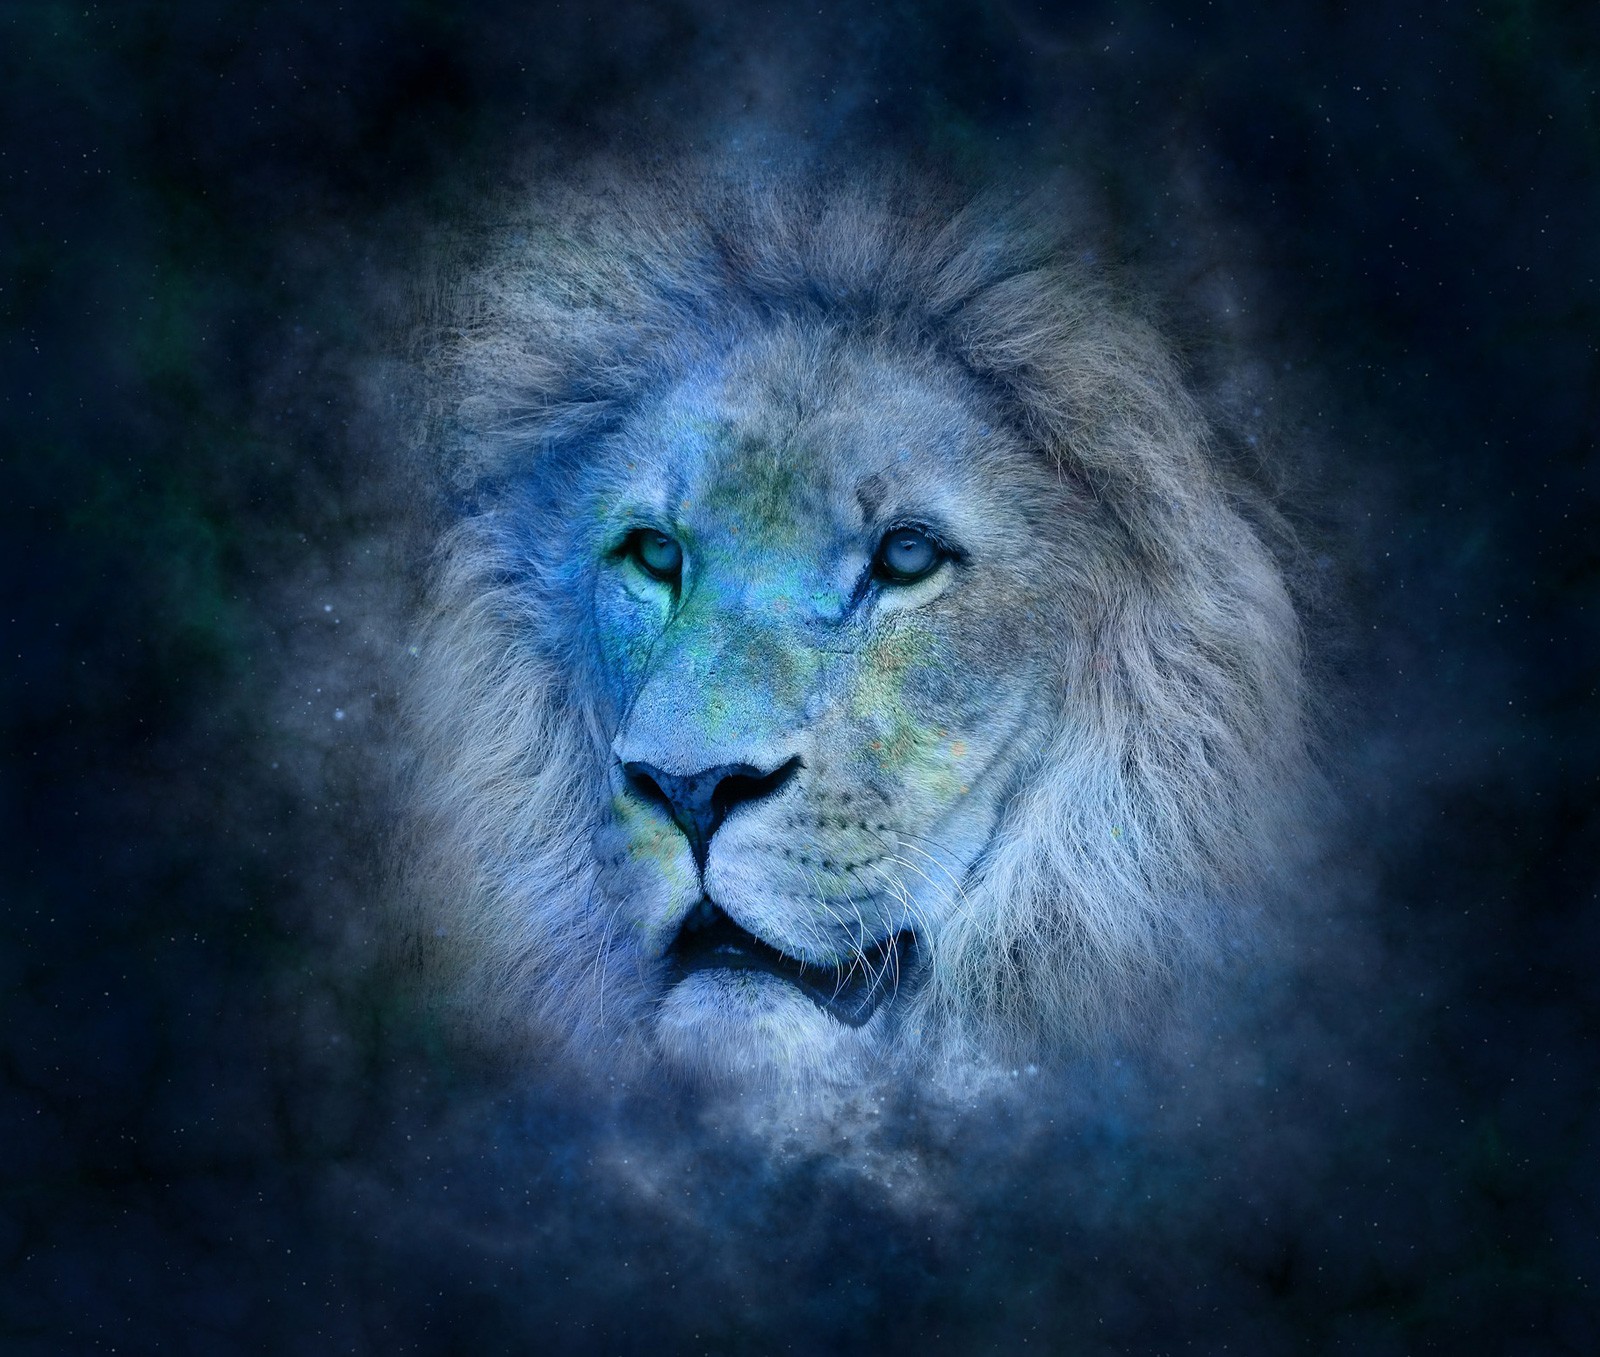 Zodiac Symbols For Leo and Leo Sign Meaning on Whats-Your-Sign.com